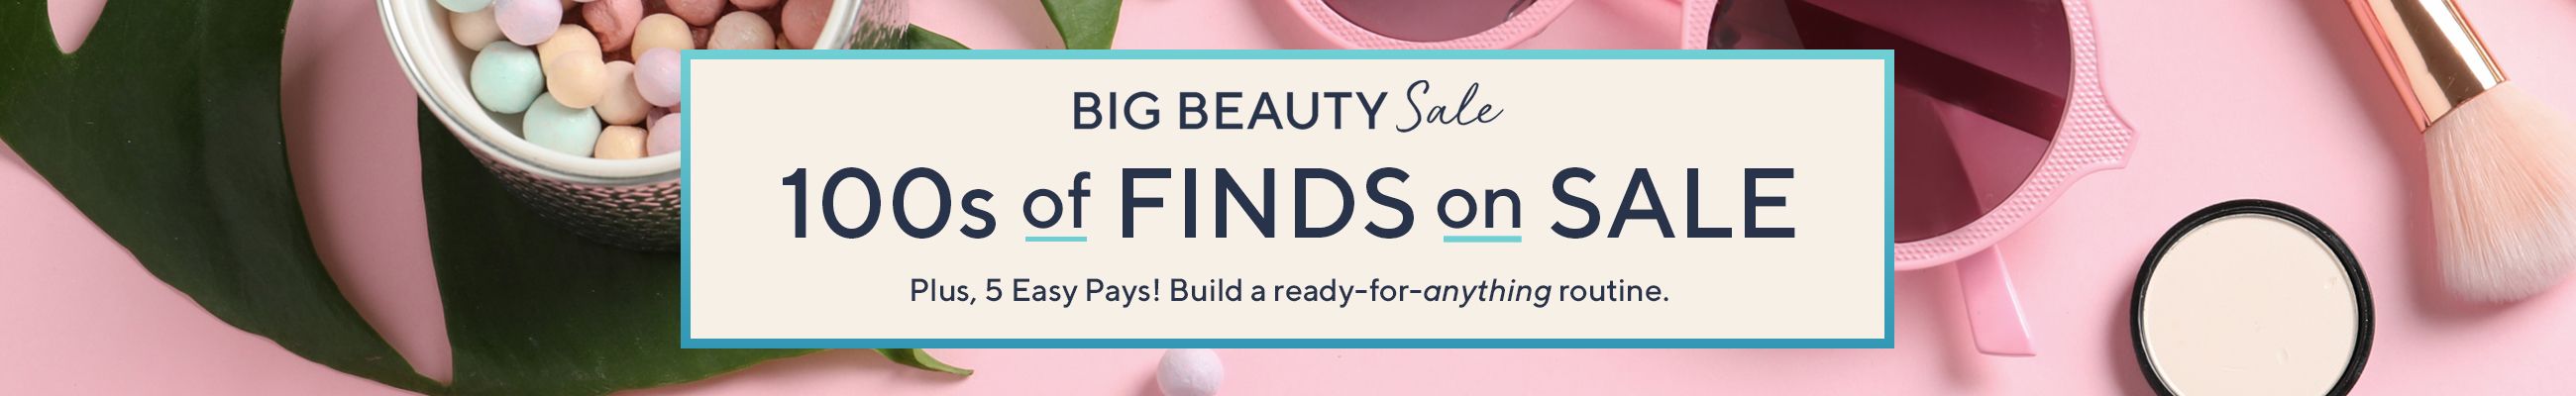 Big Beauty Sale - 100s of Finds on Sale - Plus, 5 Easy Pays! Build a ready-for-anything routine.